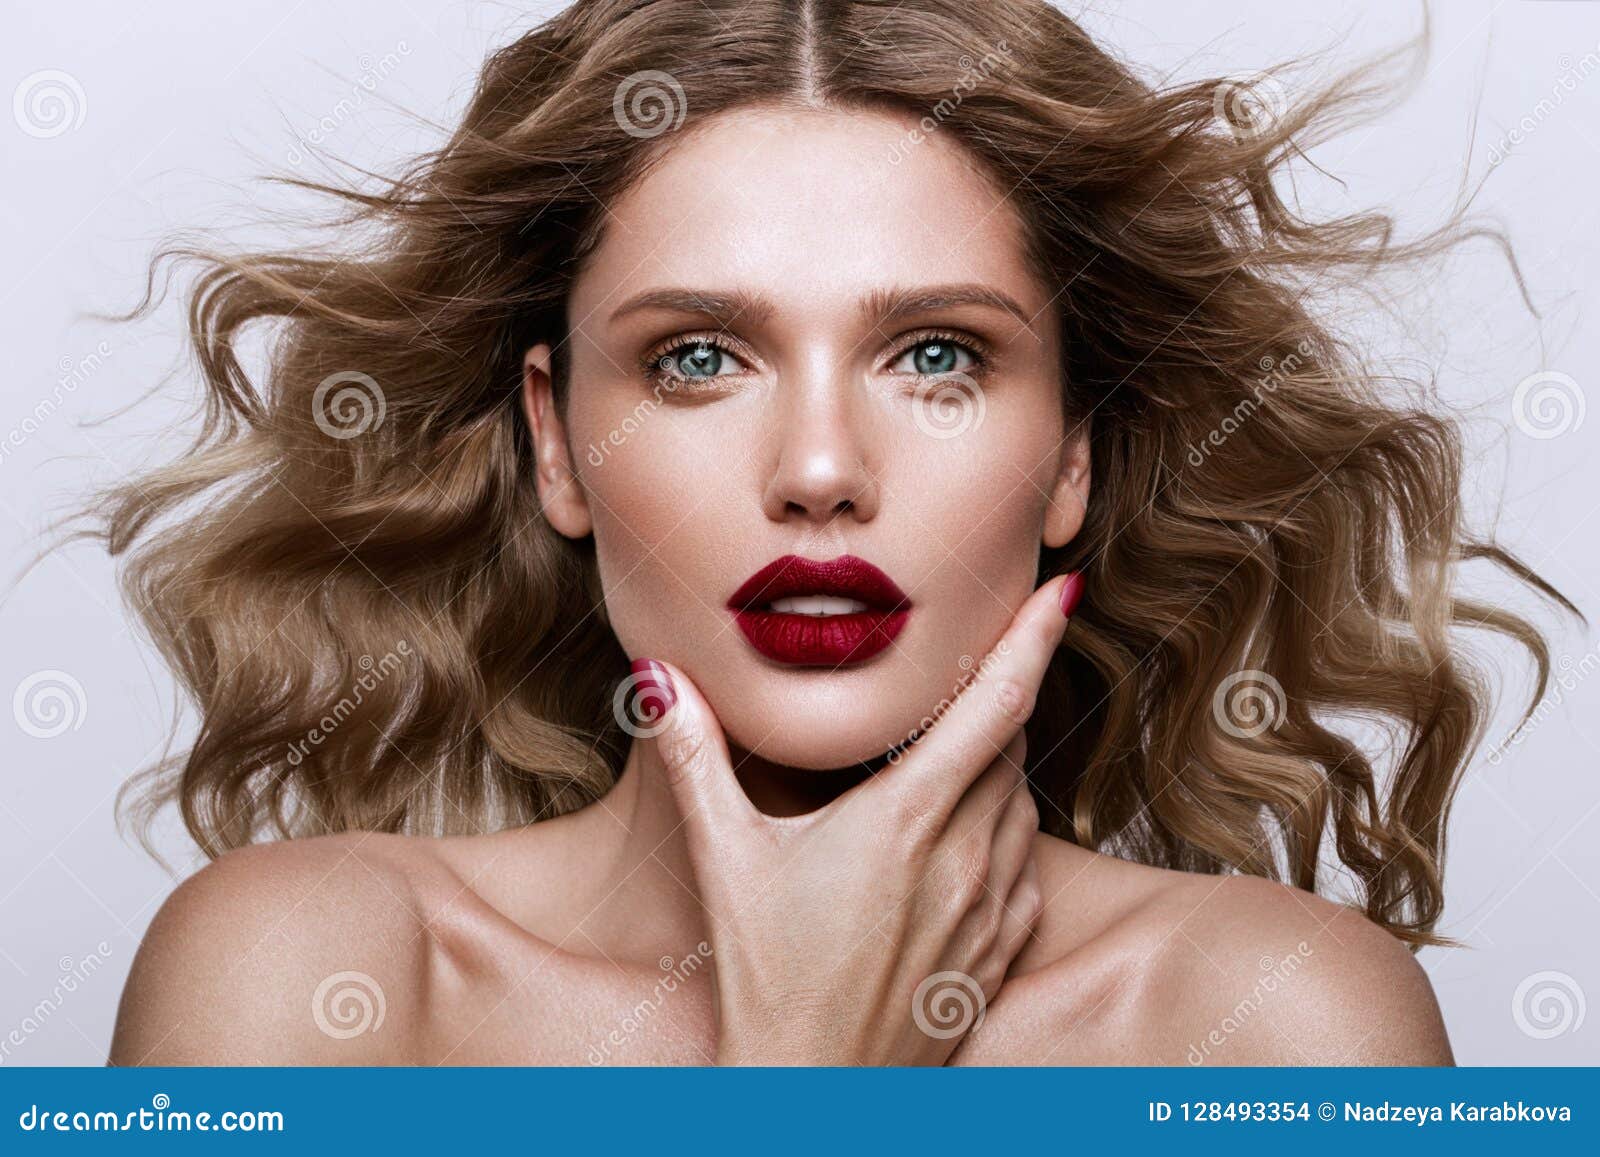 Beauty Portrait with Blue Eyes and Curly Hair - wide 3